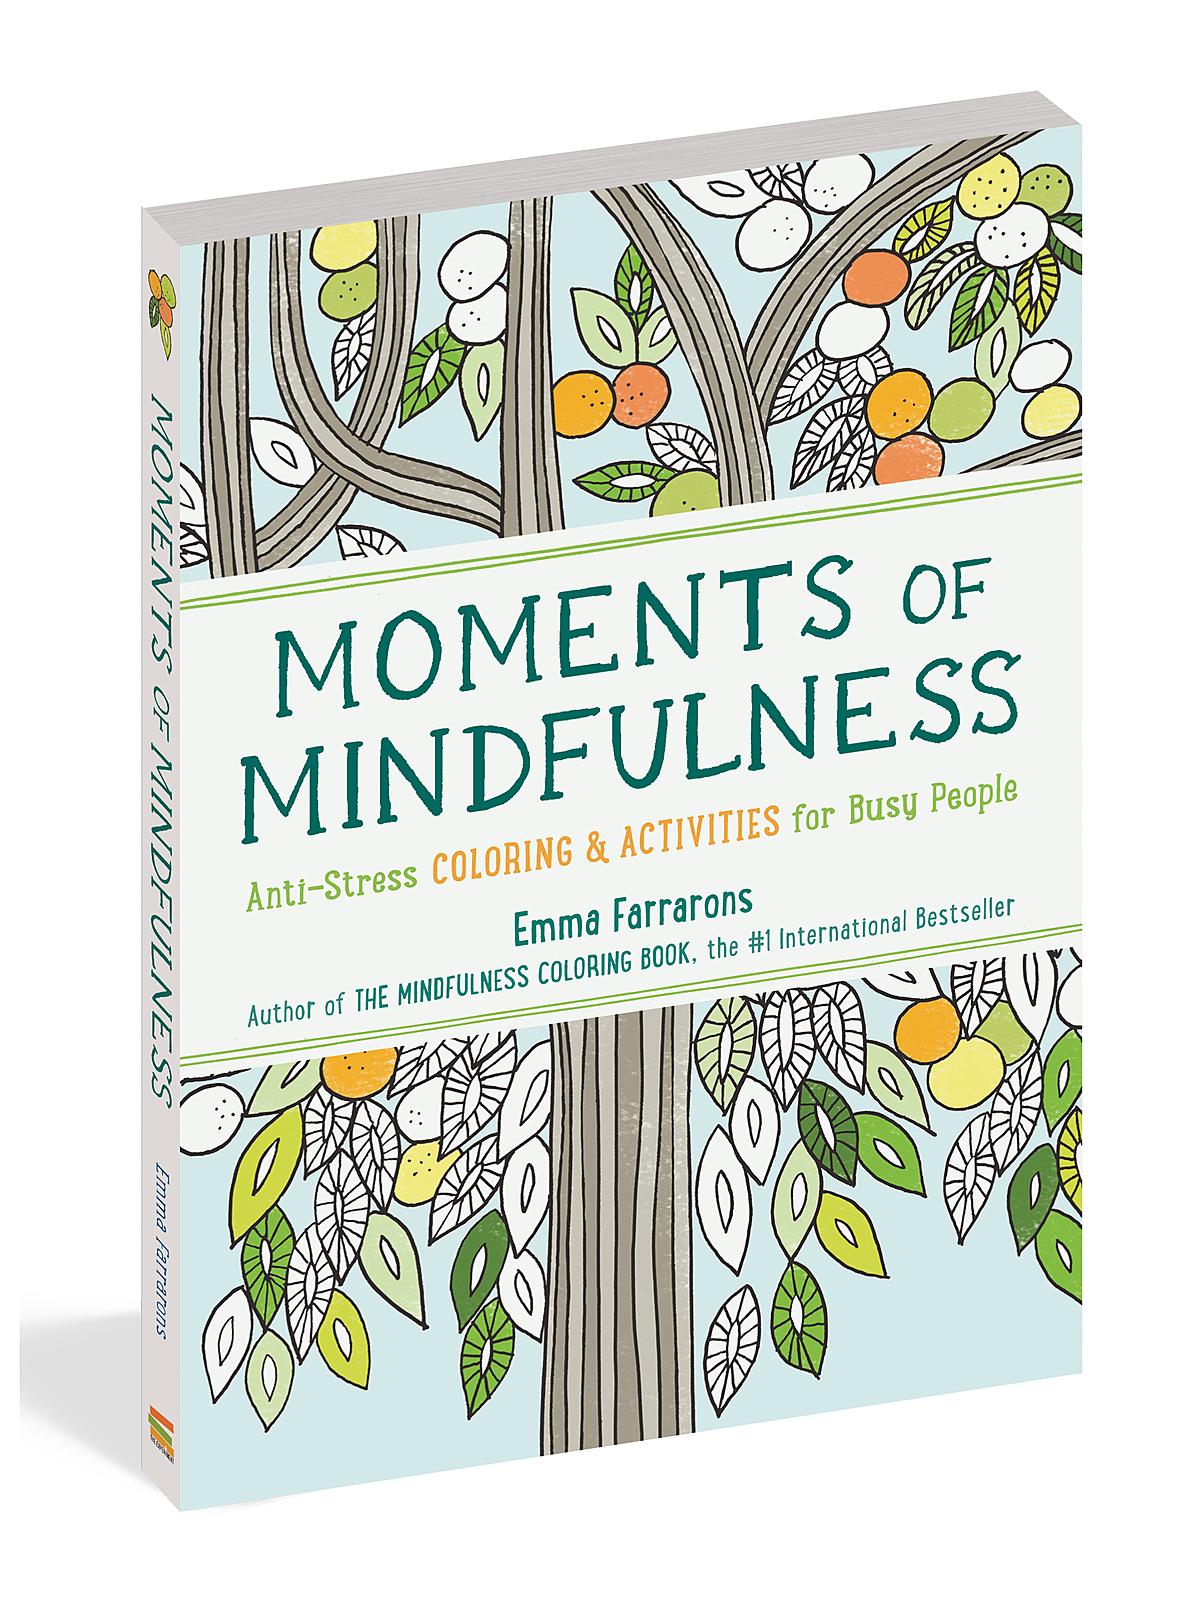 The Mindfulness Coloring Book Volume 3